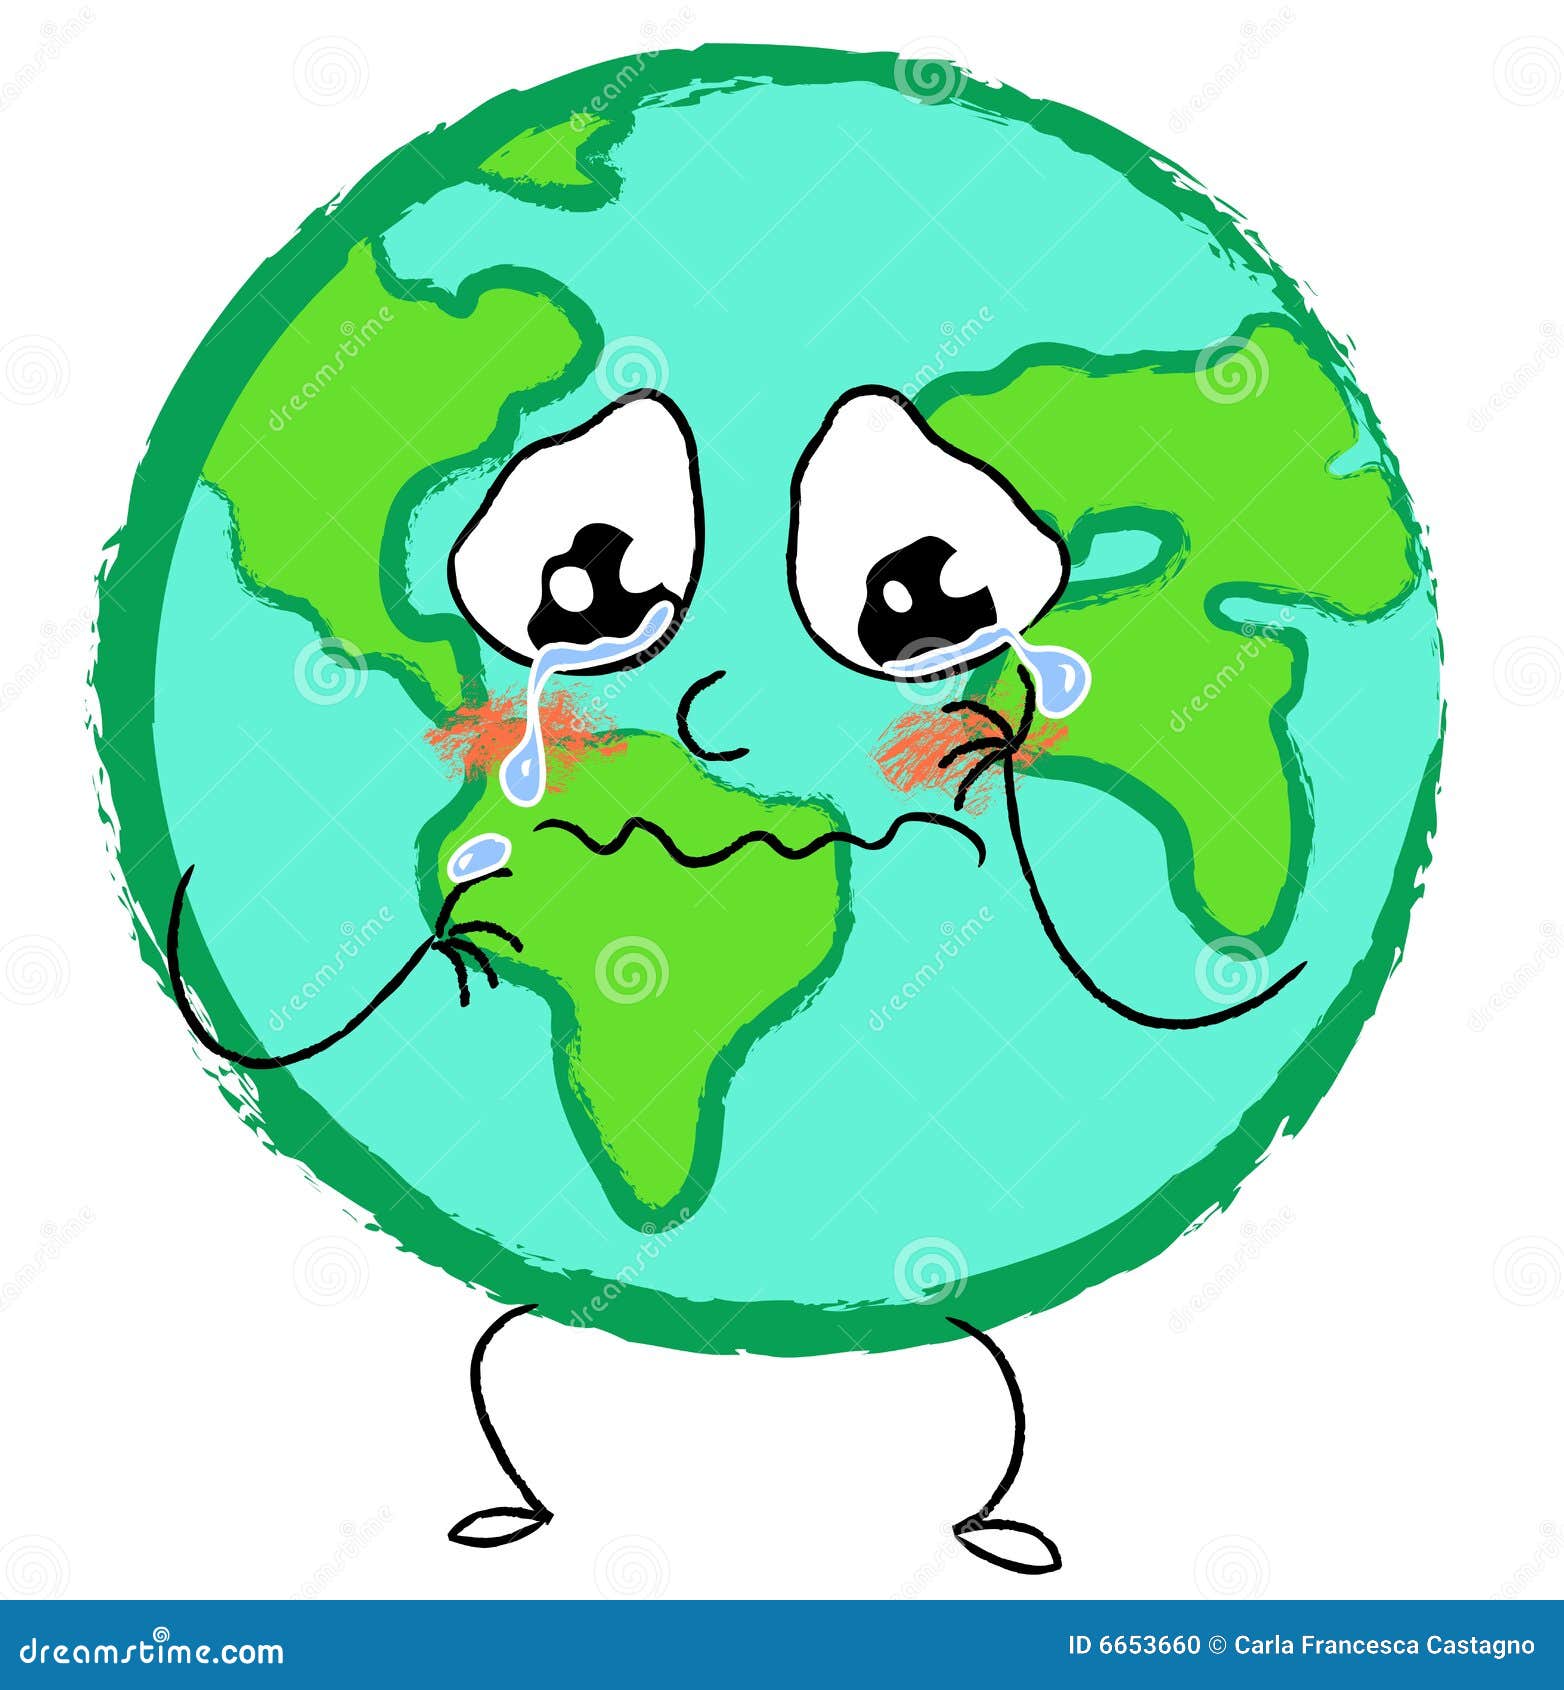 earth crying clipart - photo #7